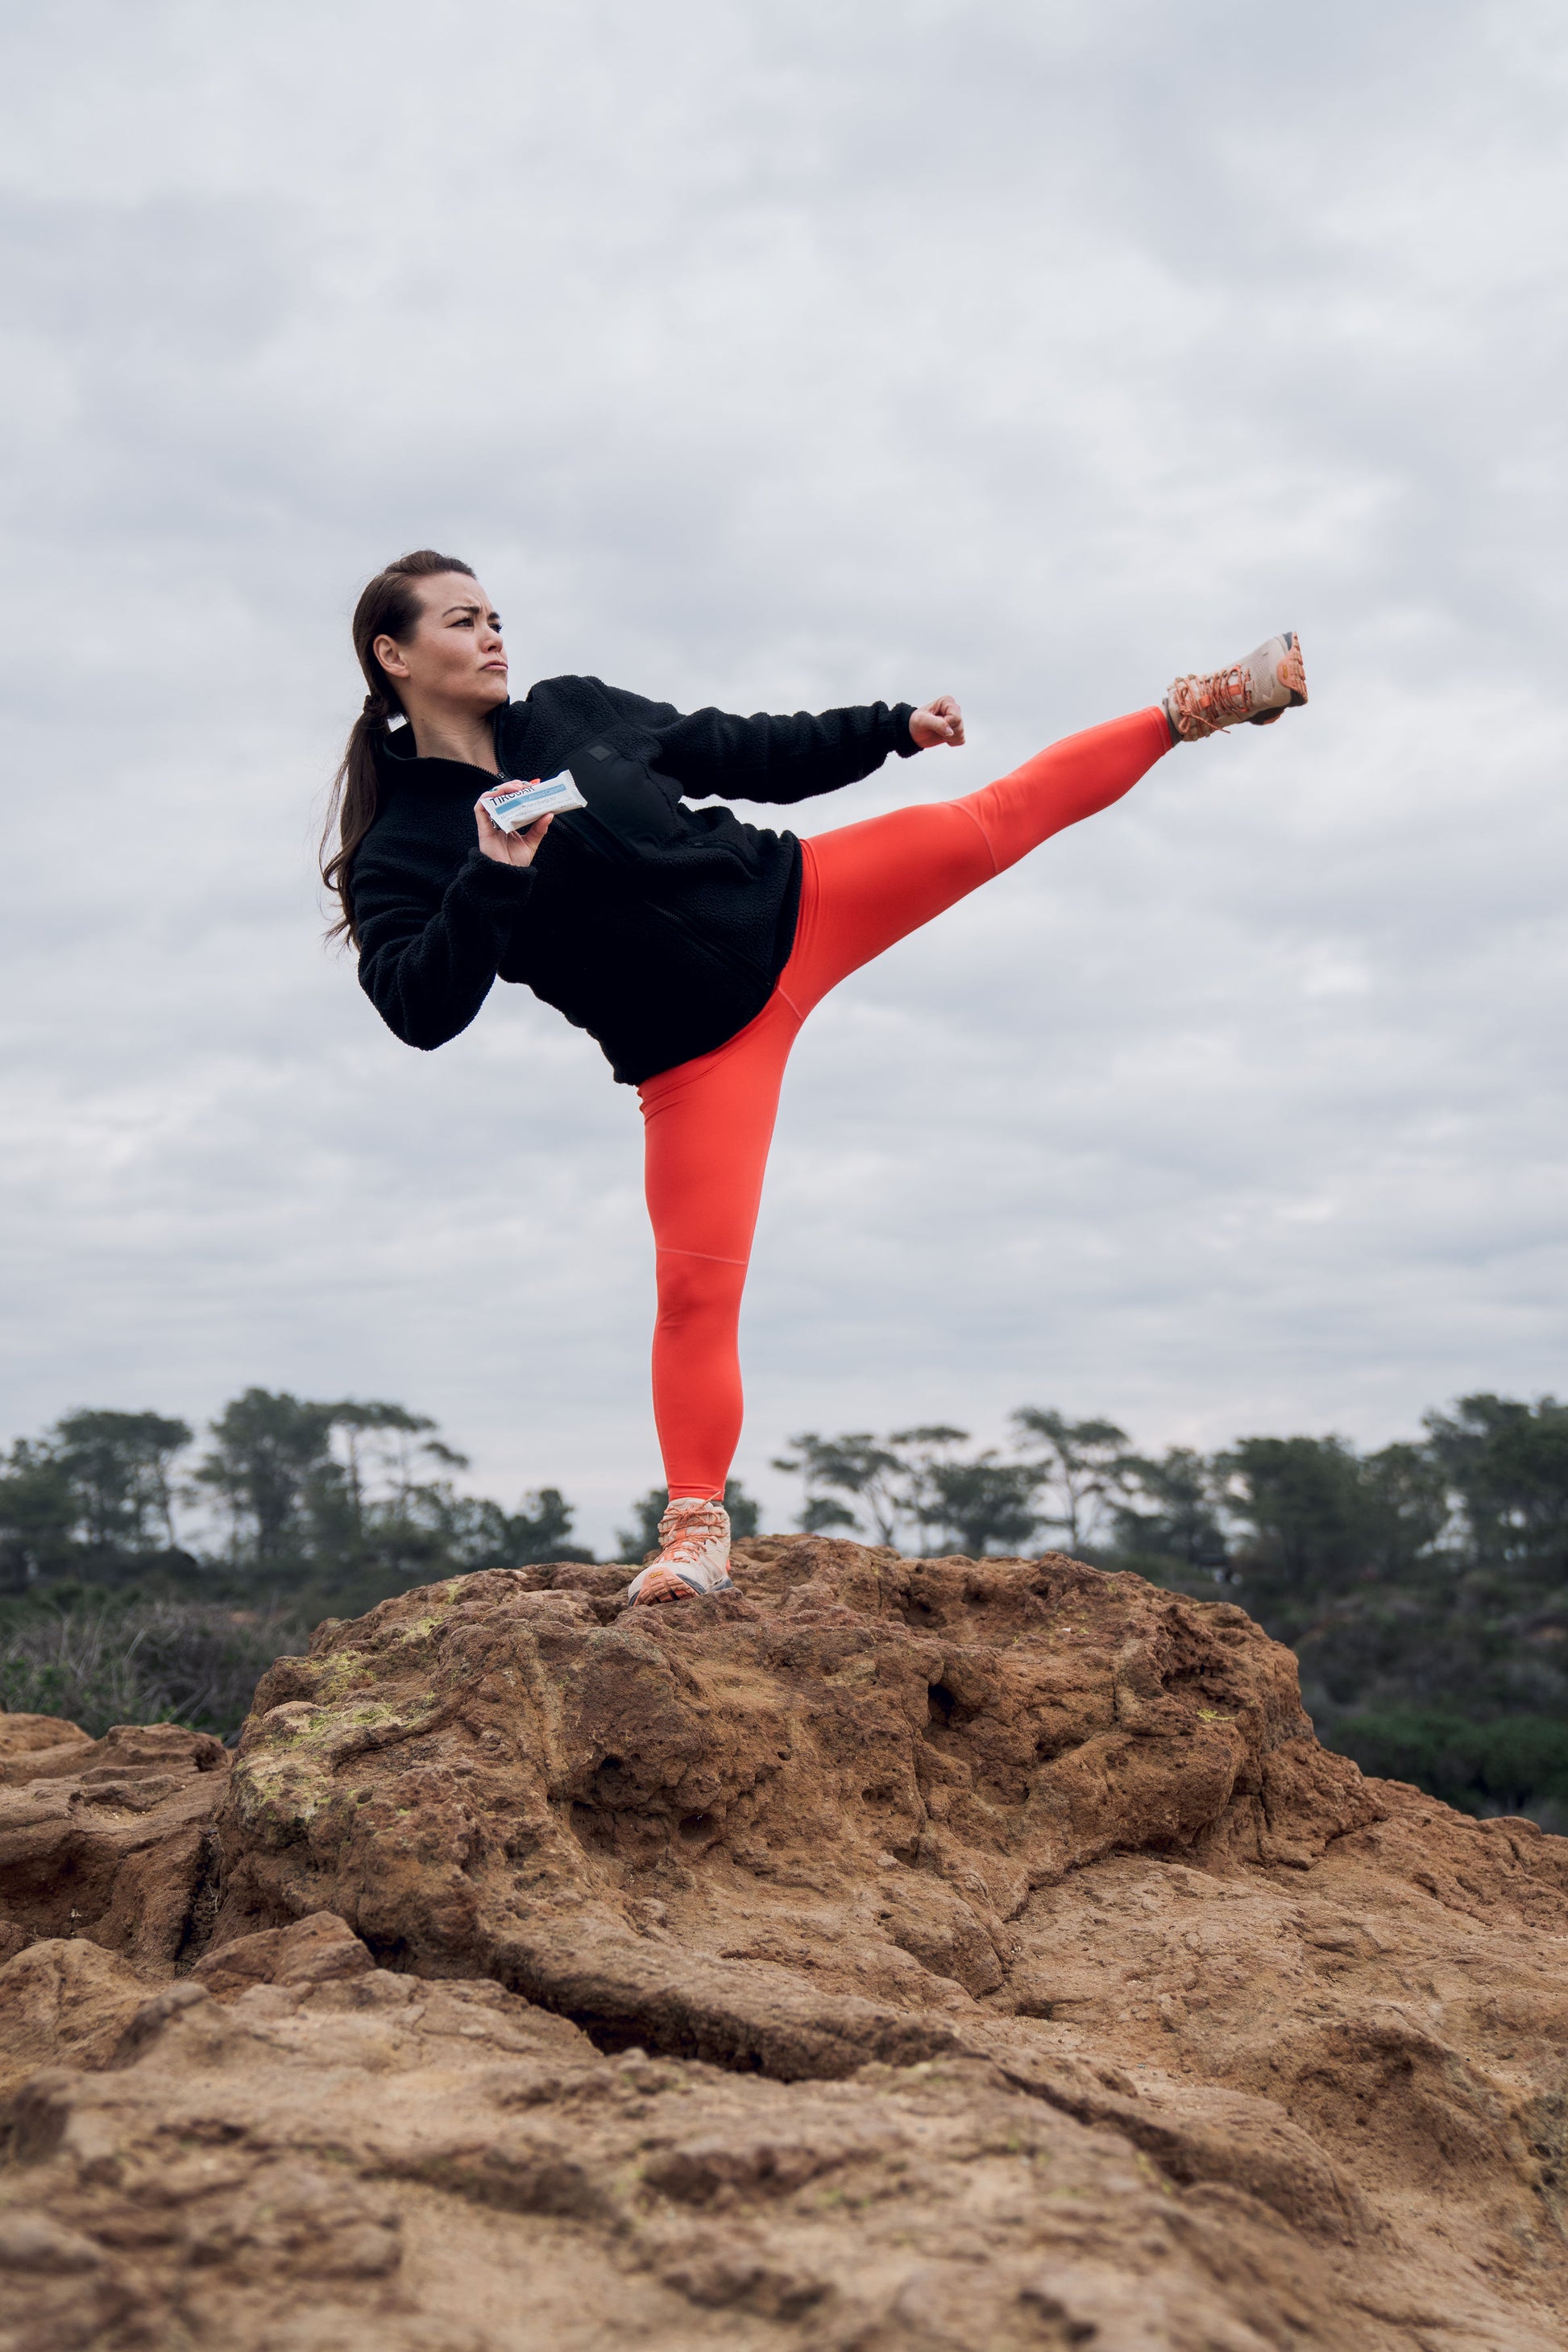 A woman performs a kick while working out on top of a mountain, holding an almond coconut TIROBAR, an all natural and vegan protein bar. The woman wears workout clothes and stands on a rocky surface overlooking a scenic view.